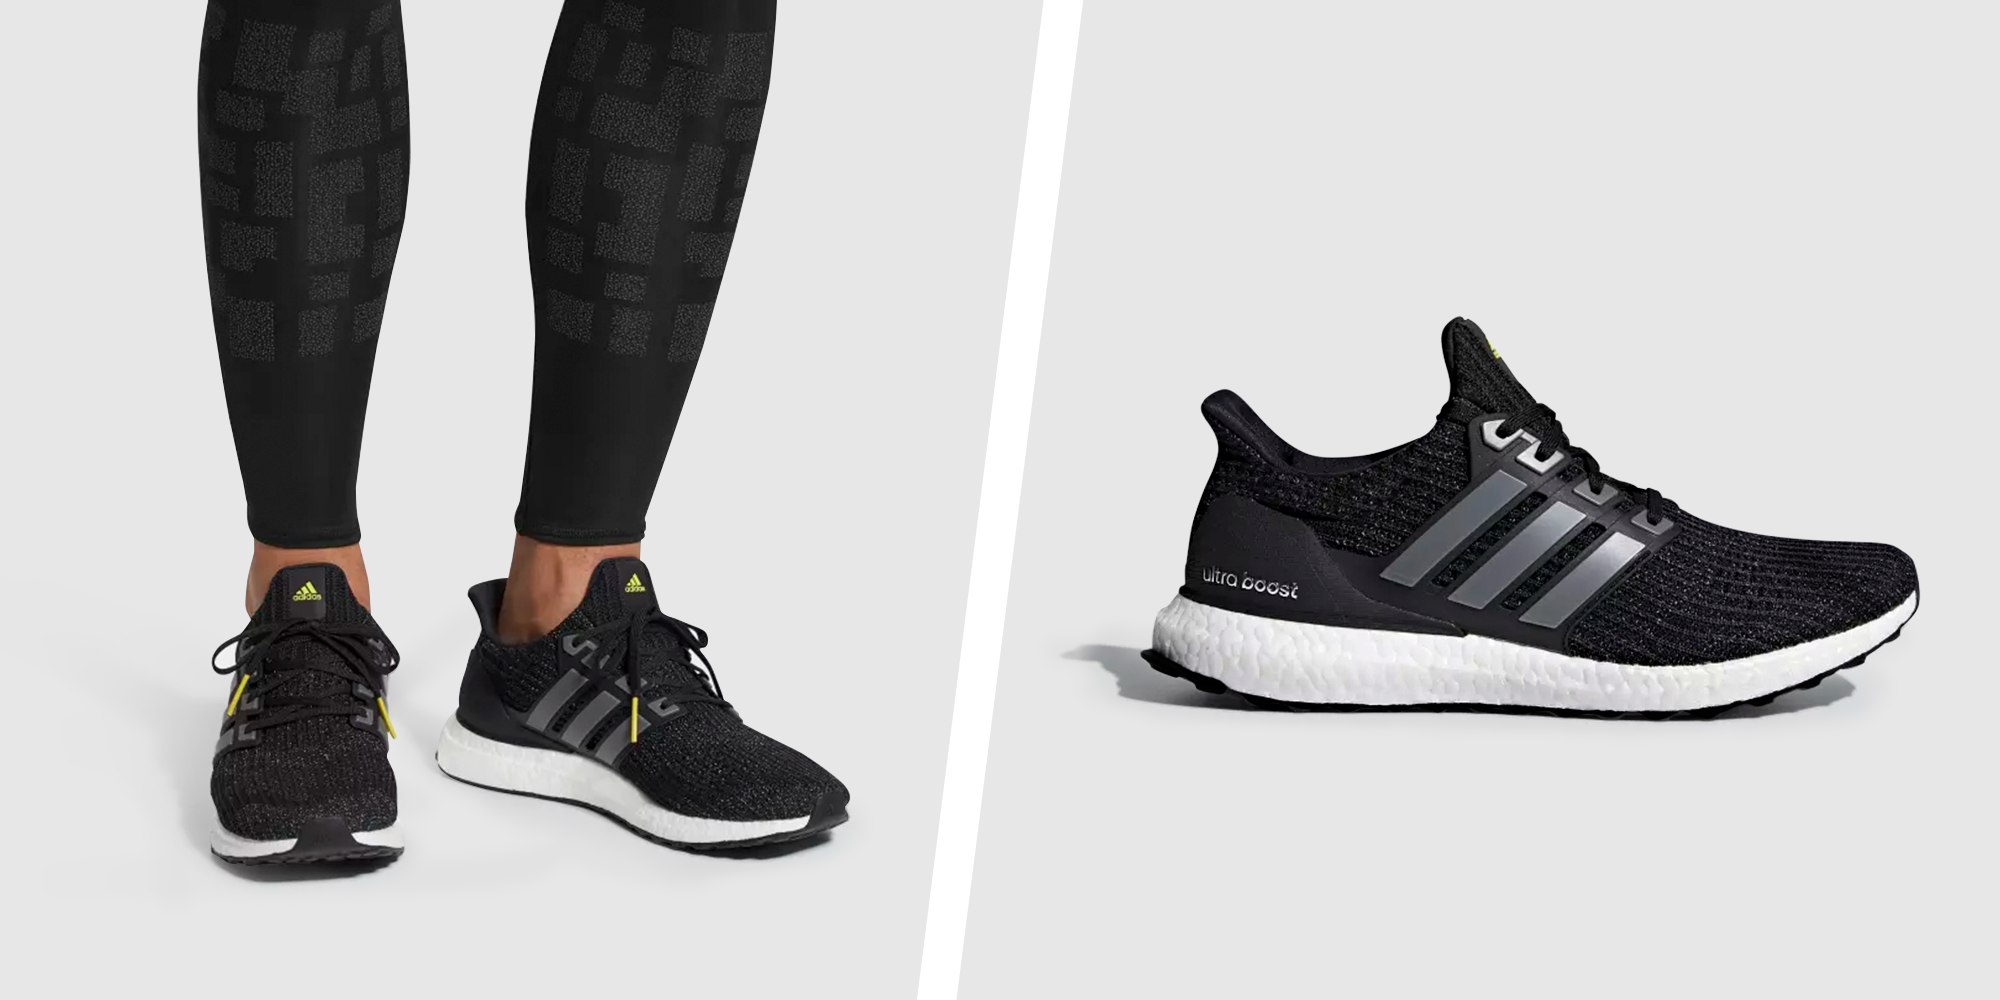 Adidas Shoes for Men Are On Sale for Off